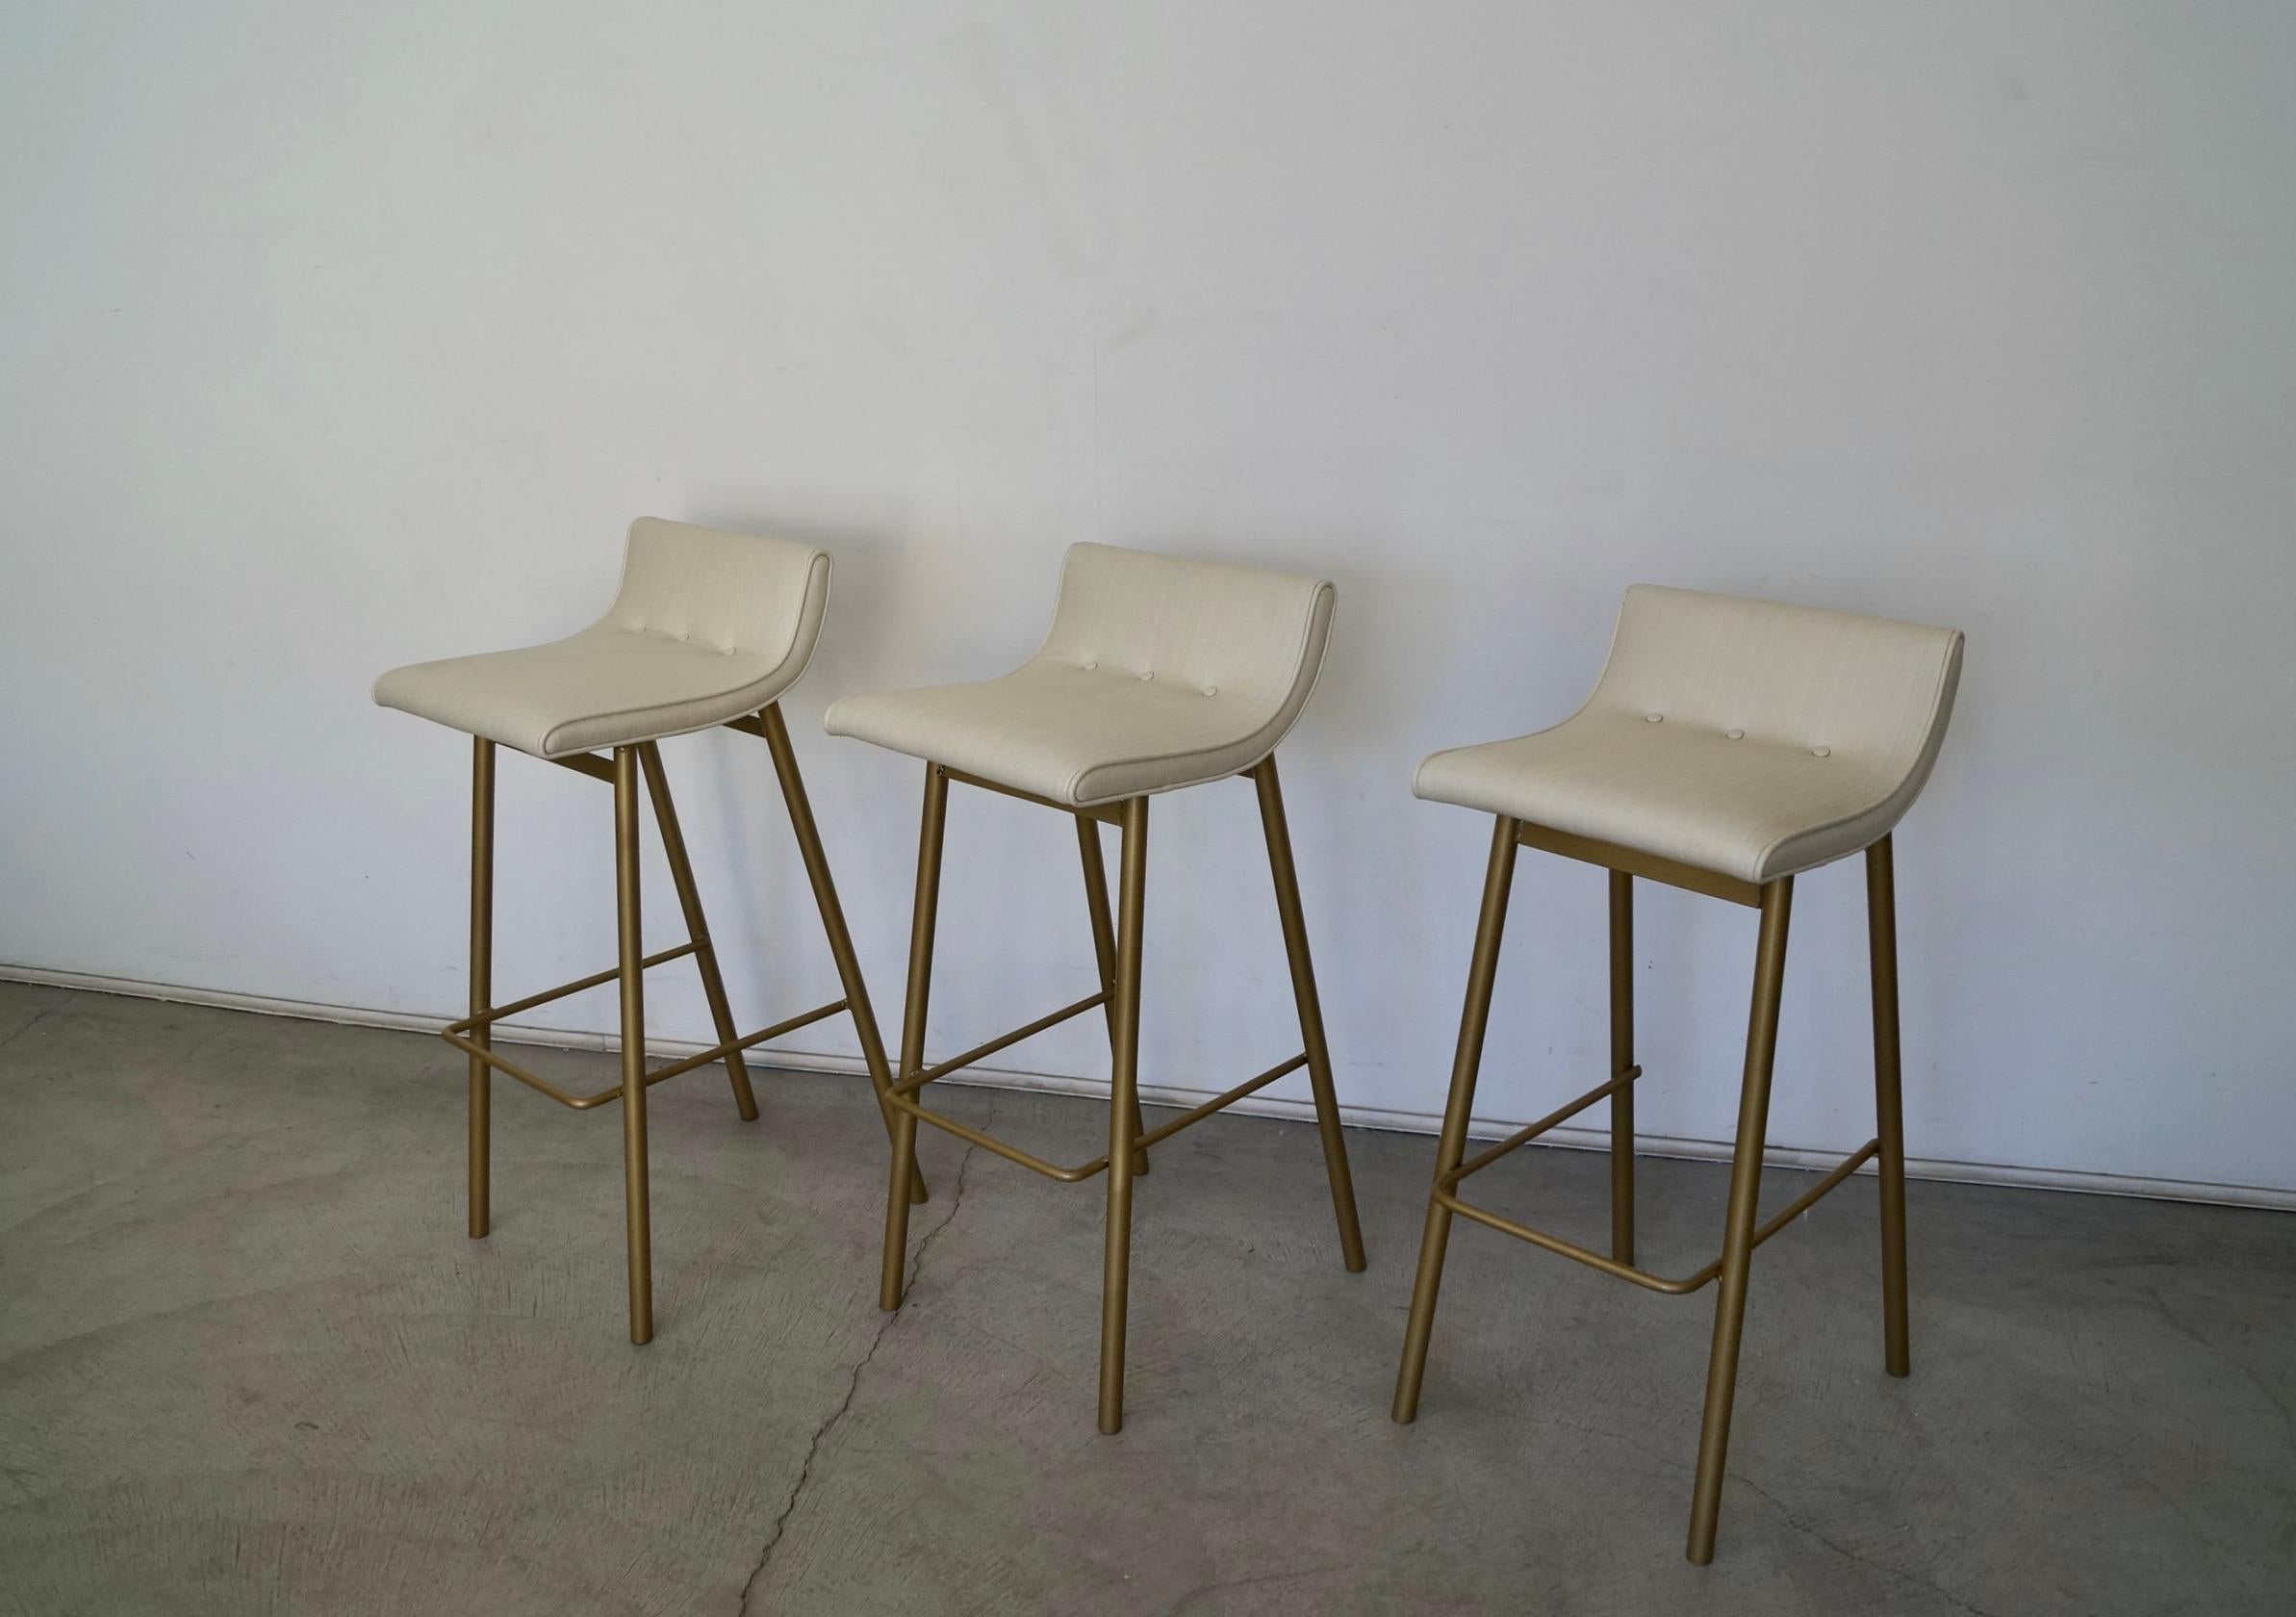 Metal 1950's Mid-Century Modern Bar Stools by Vista of California - Set of Three For Sale